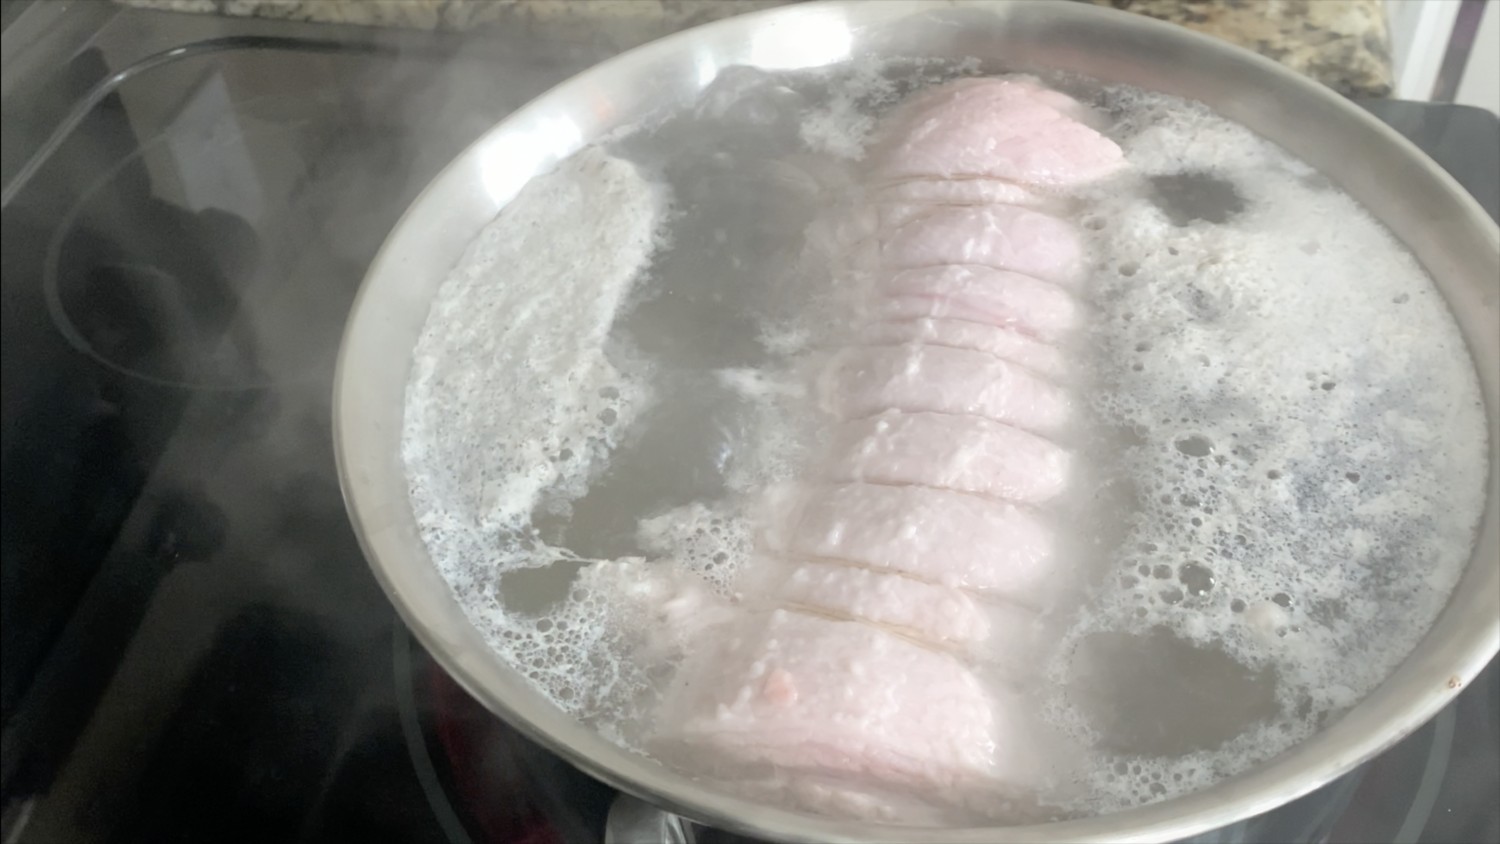 Bring water surrounding pork belly to a boil to remove impurities.